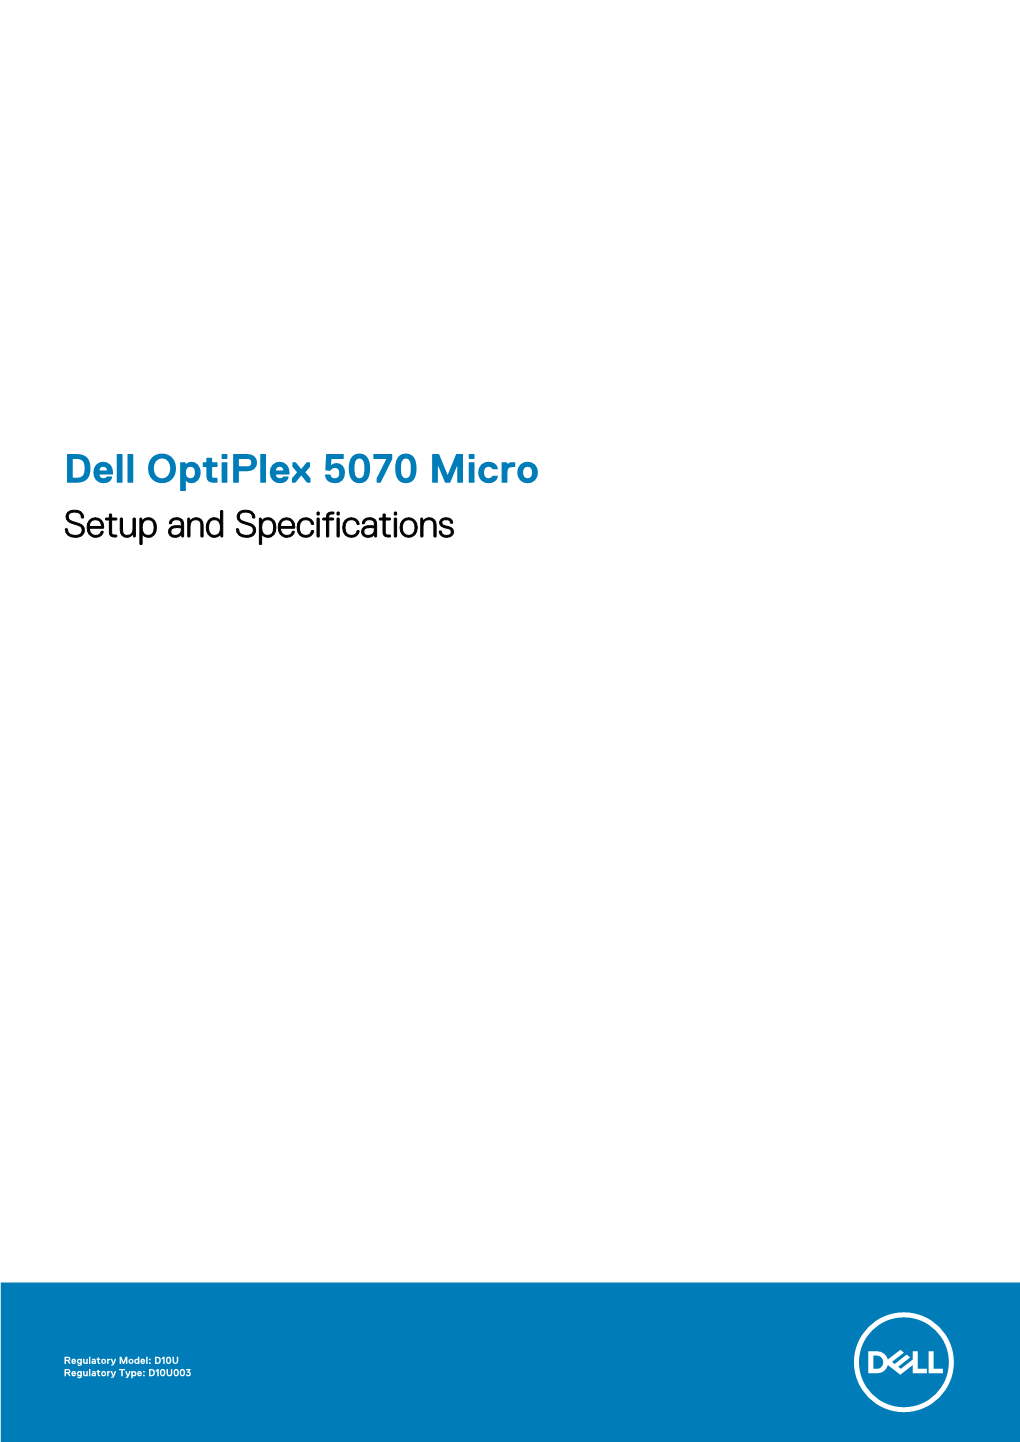 Dell Optiplex 5070 Micro Setup and Specifications